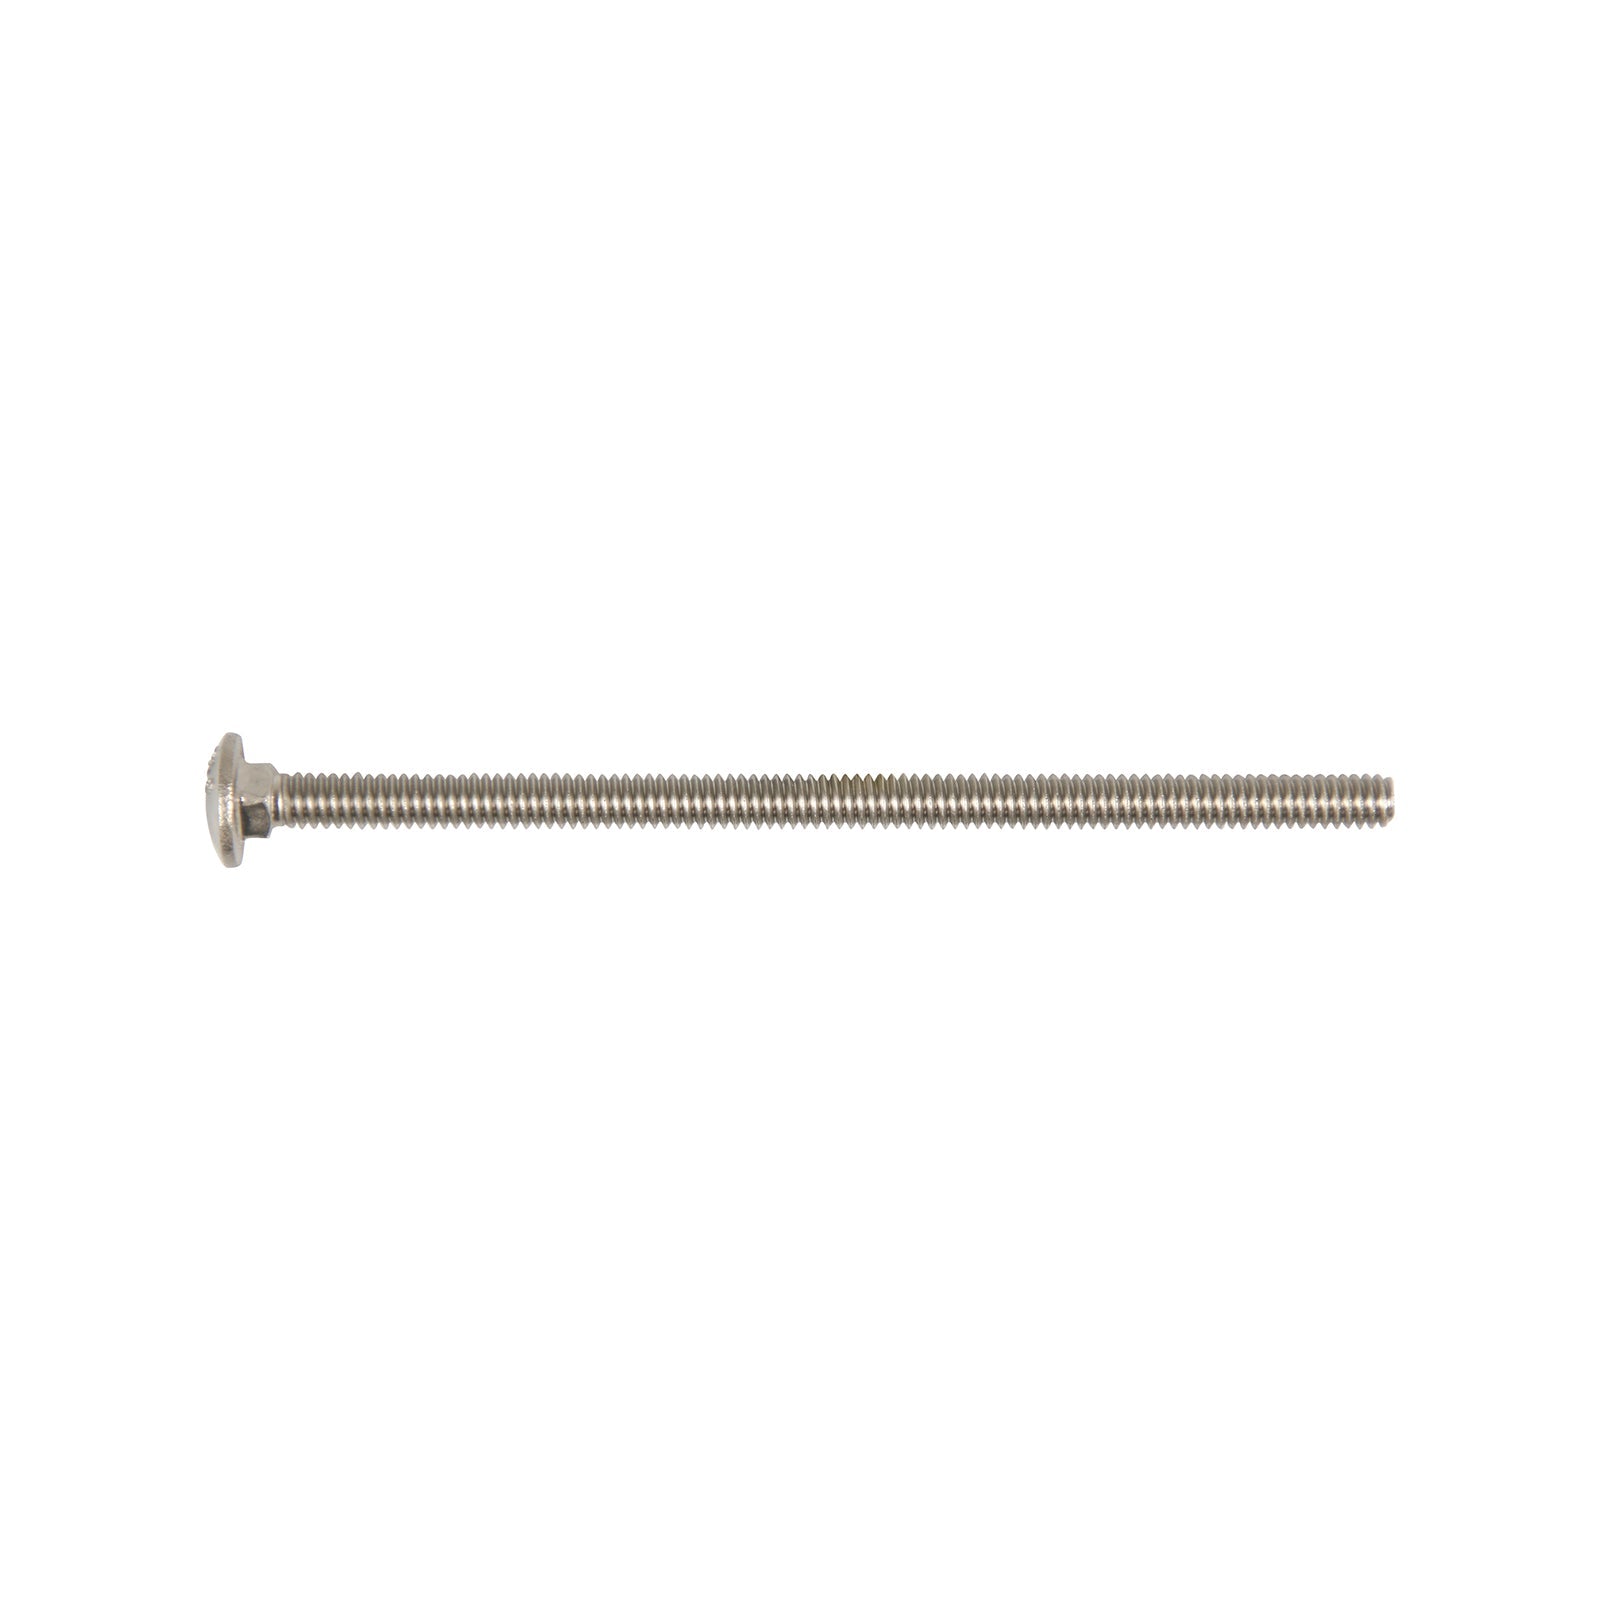 1/4"-20 x 5" Conquest Carriage Bolt - 316 Stainless Steel